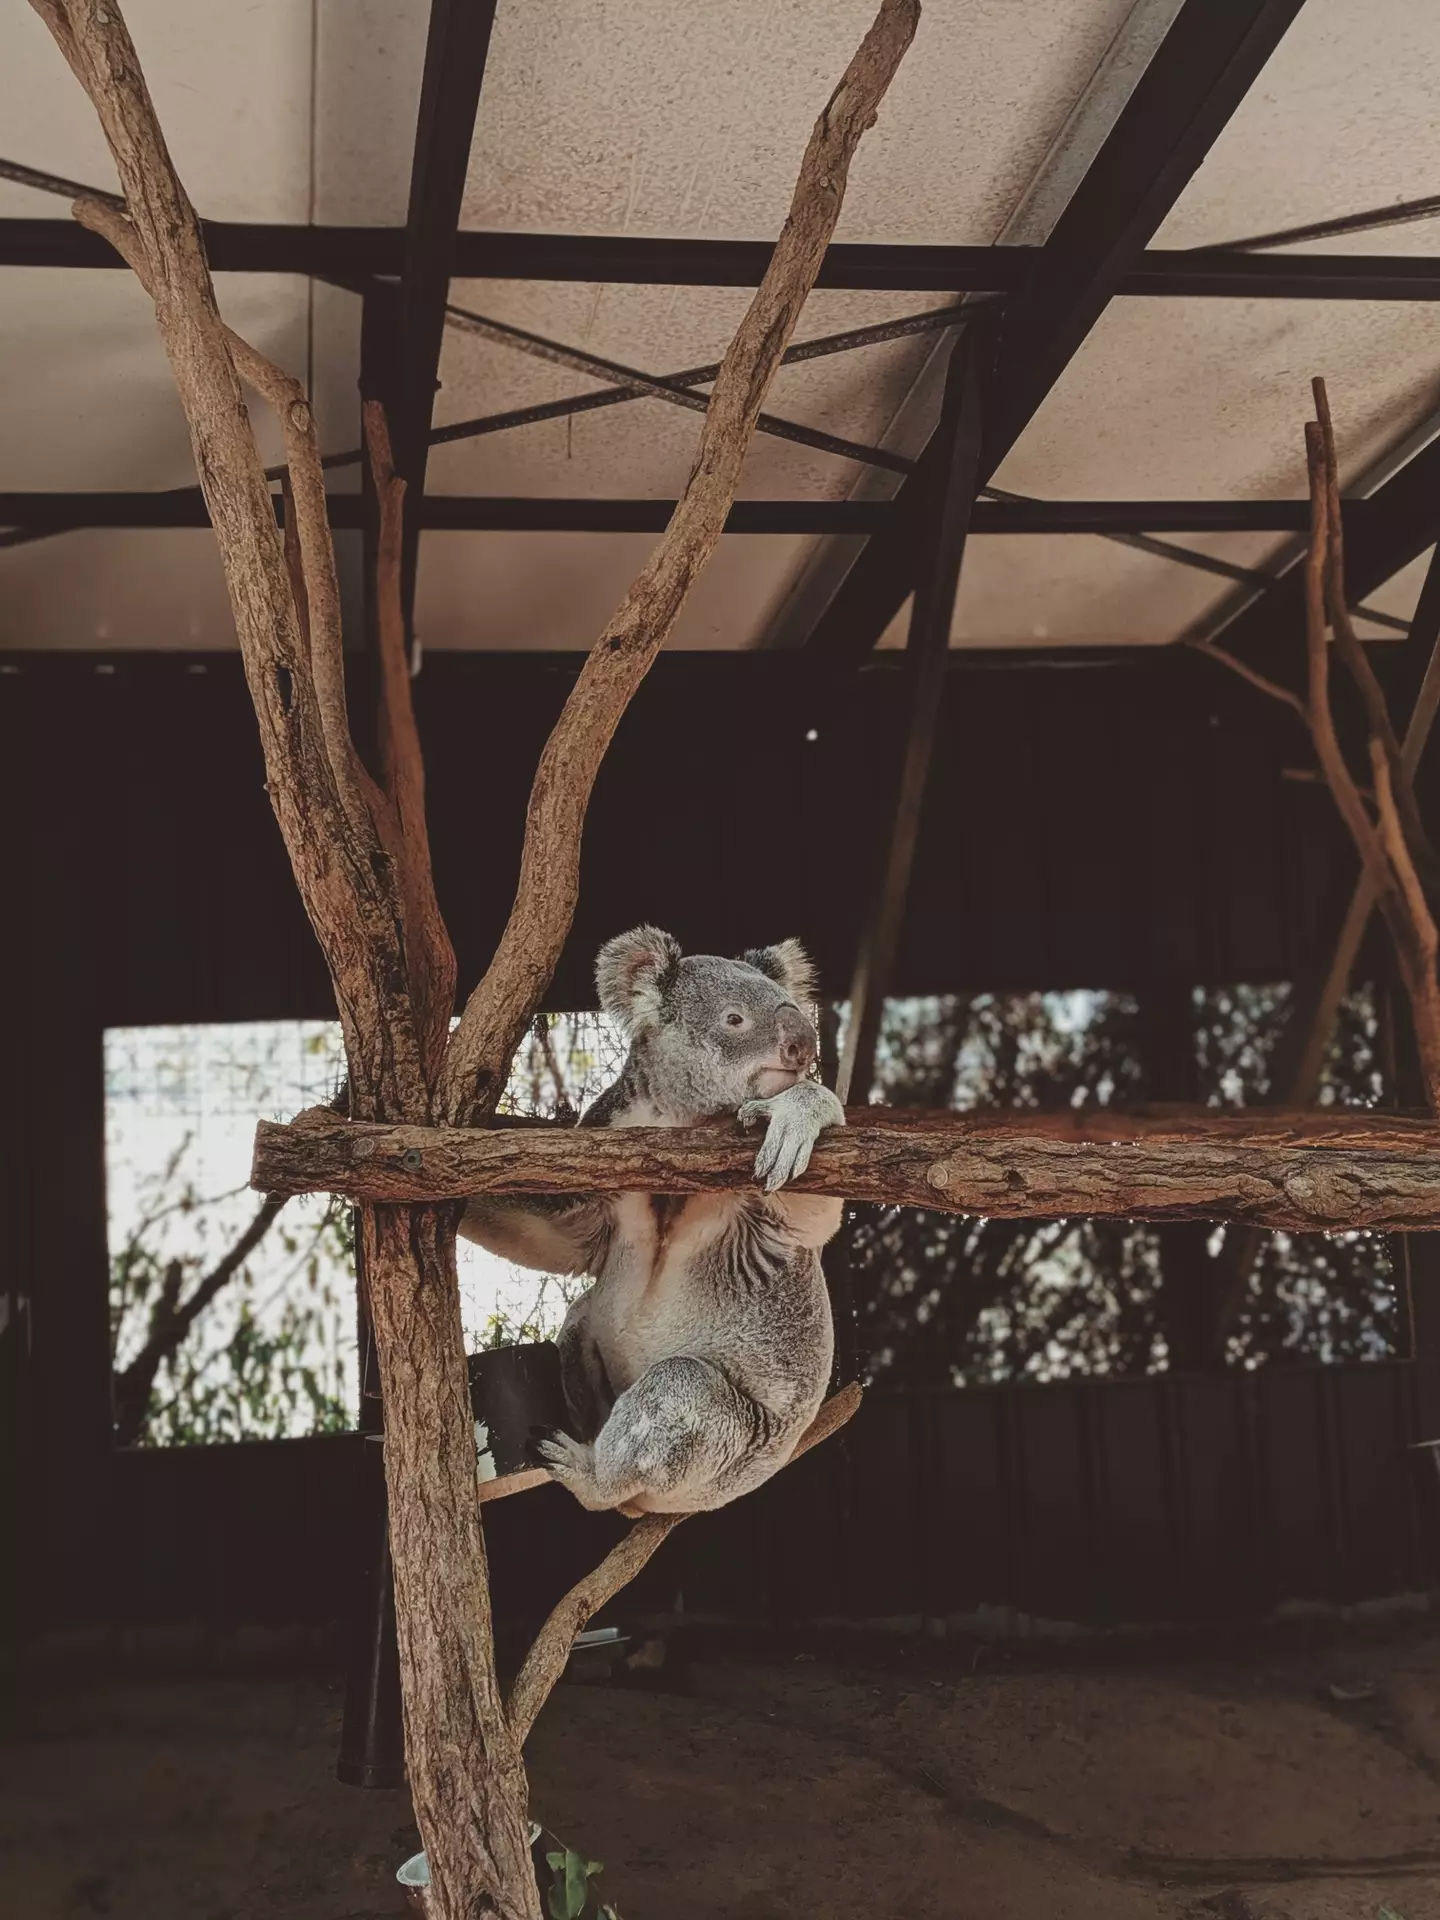 The scientists hope to catch and vaccinate around 50 koalas.